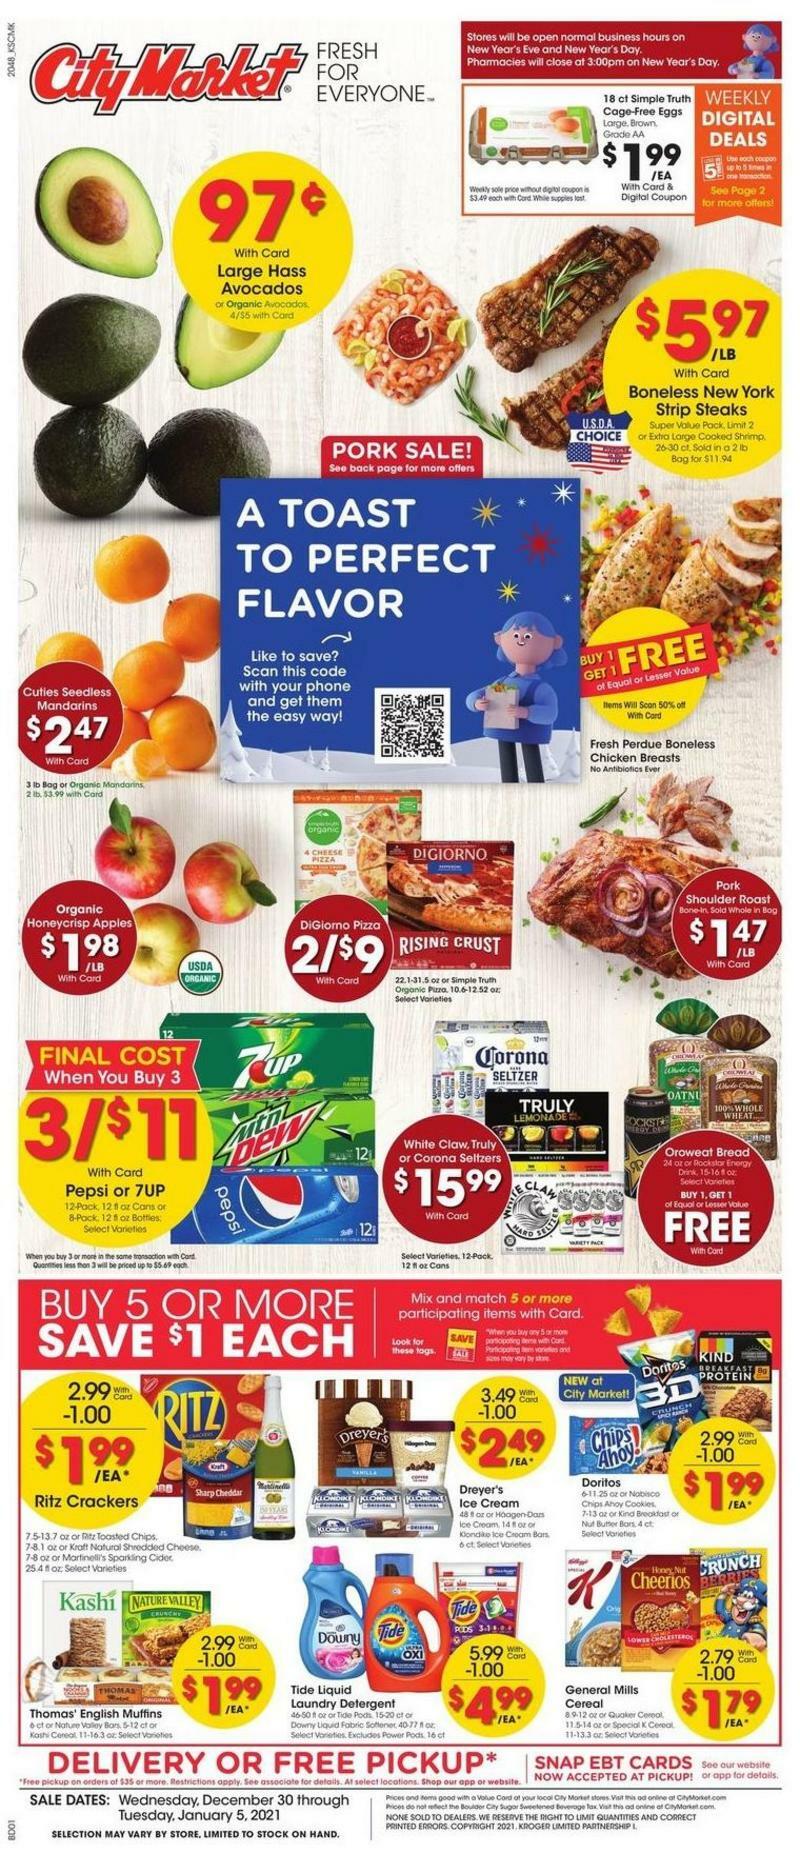 City Market Weekly Ads & Special Buys from December 30